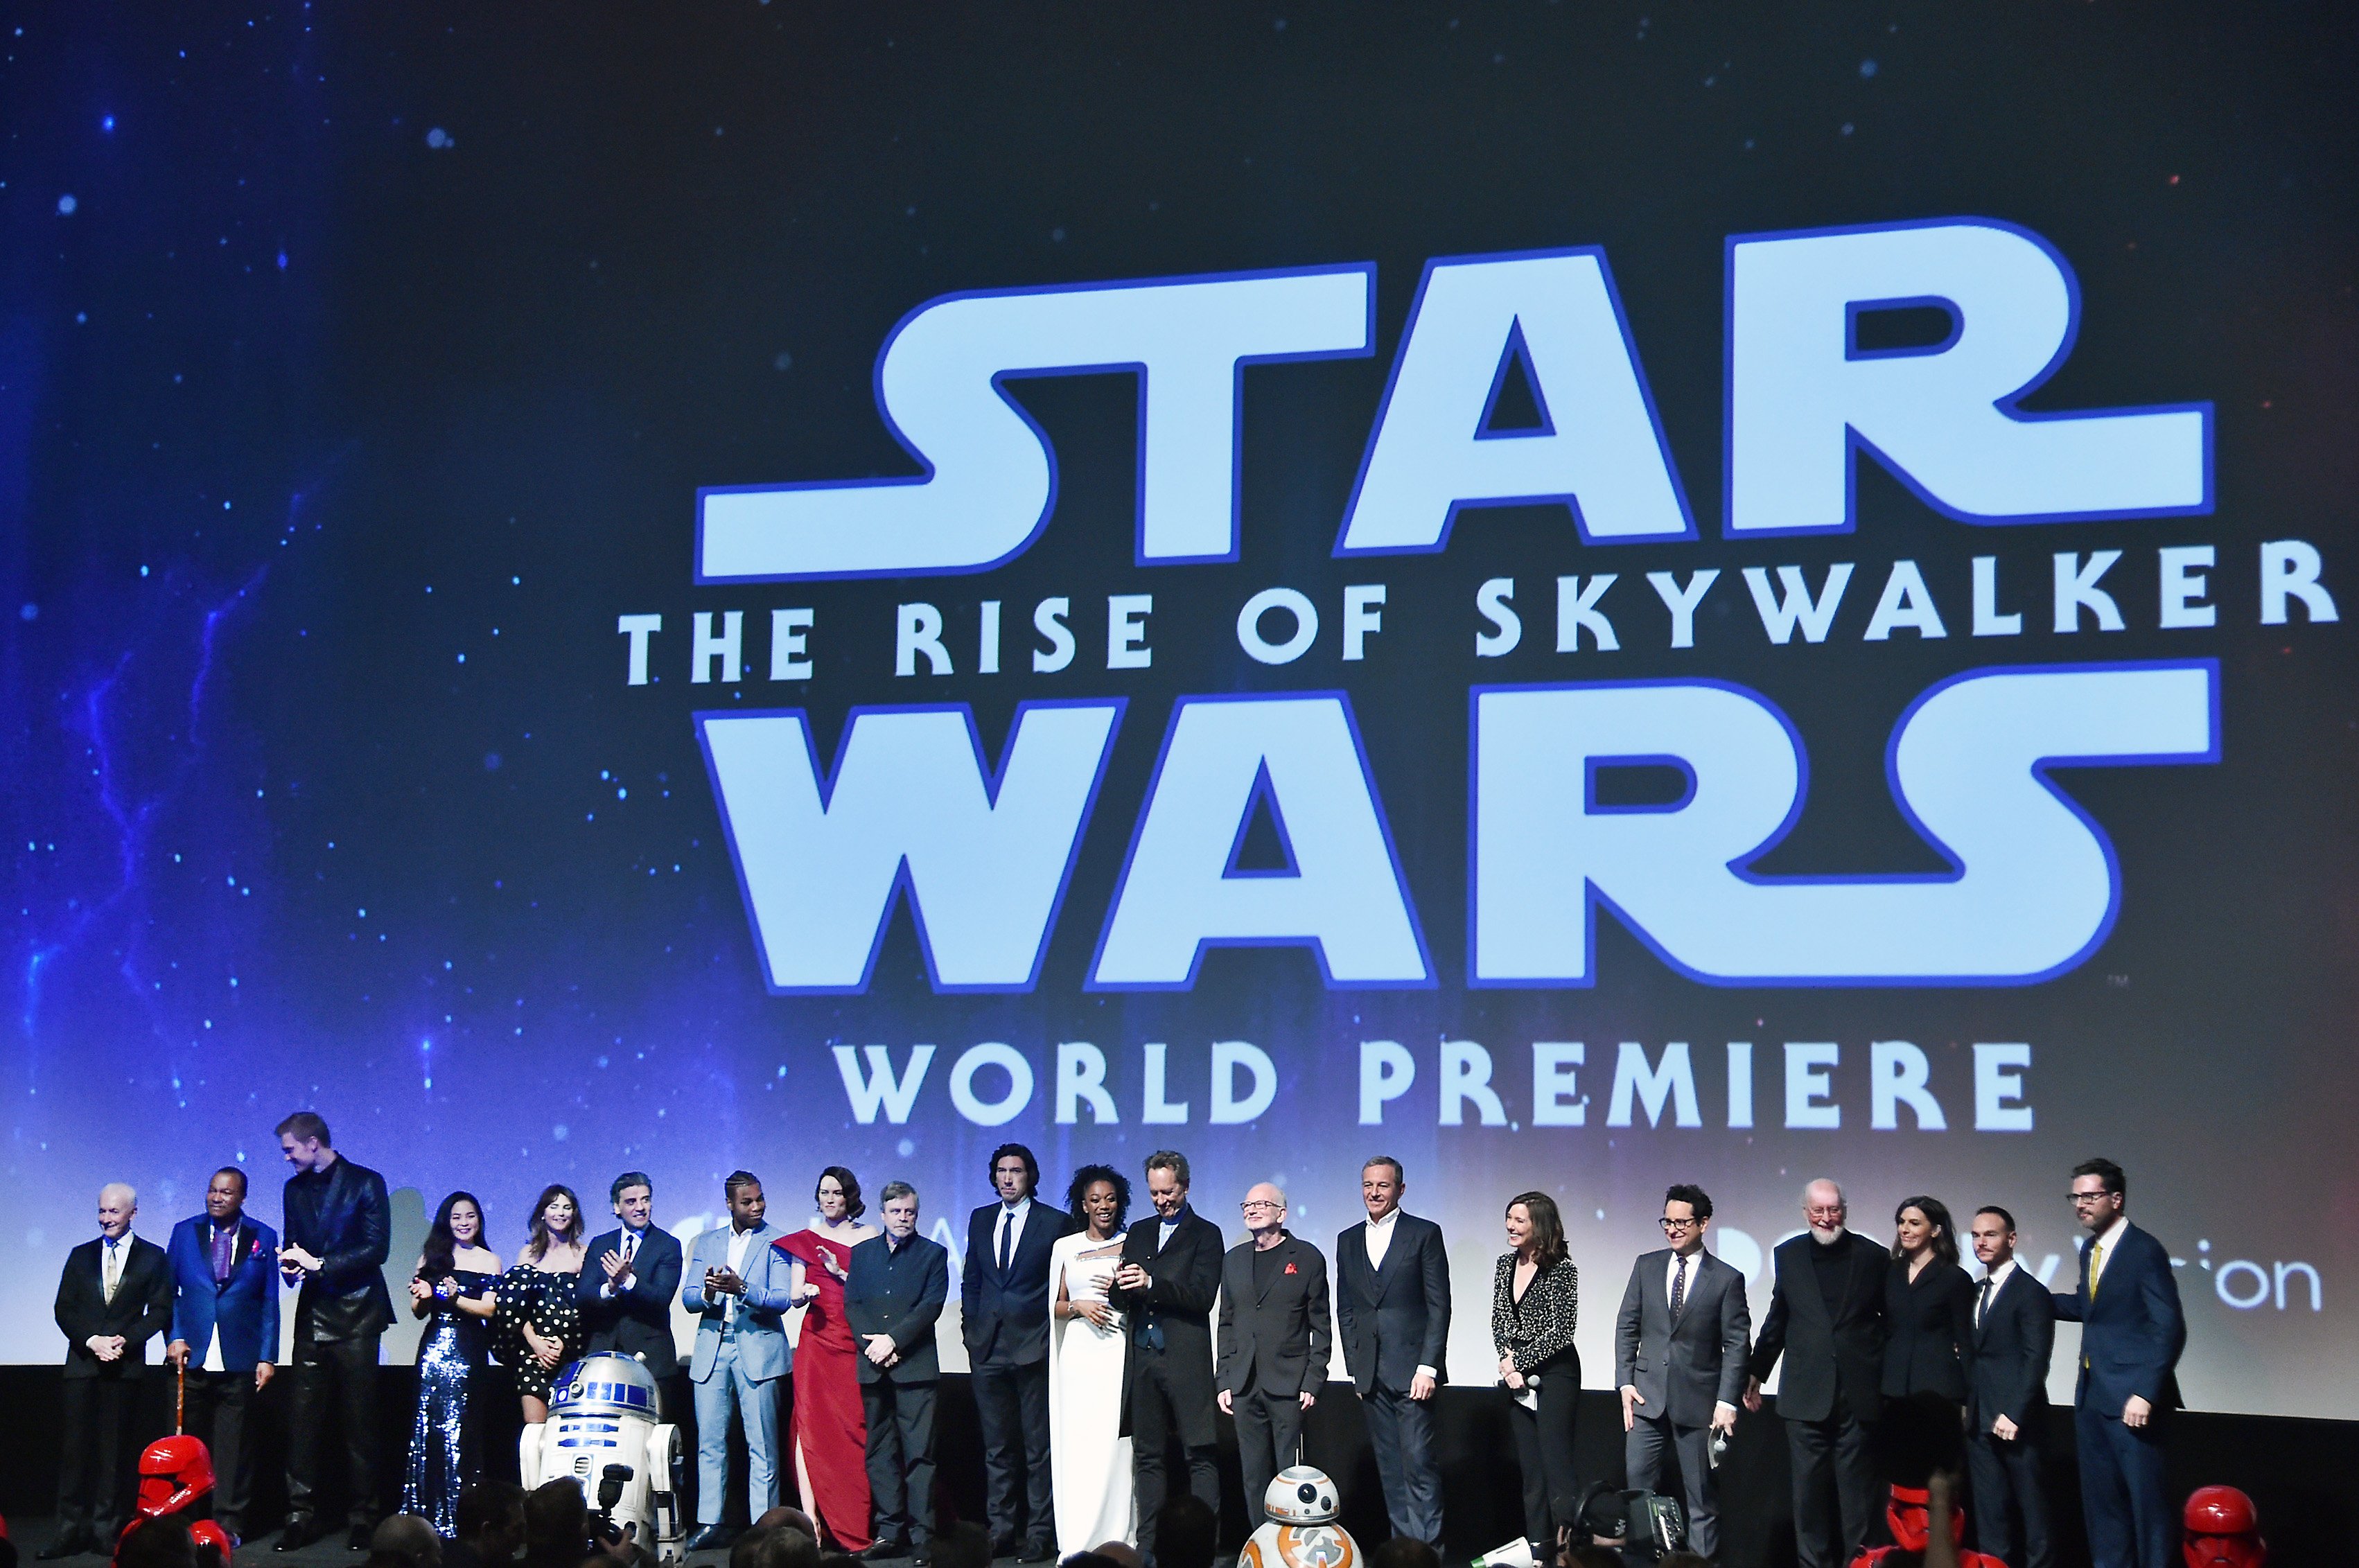 The Cast of 'Star Wars: The Rise of Skywalker,' The Walt Disney Company Chairman and CEO Bob Iger, Producer and President of Lucasfilm Kathleen Kennedy, Director, Writer and Producer J.J. Abrams, composer John Williams, producer Michelle Rejwan, Writer Chris Terrio and executive producer Callum Greene